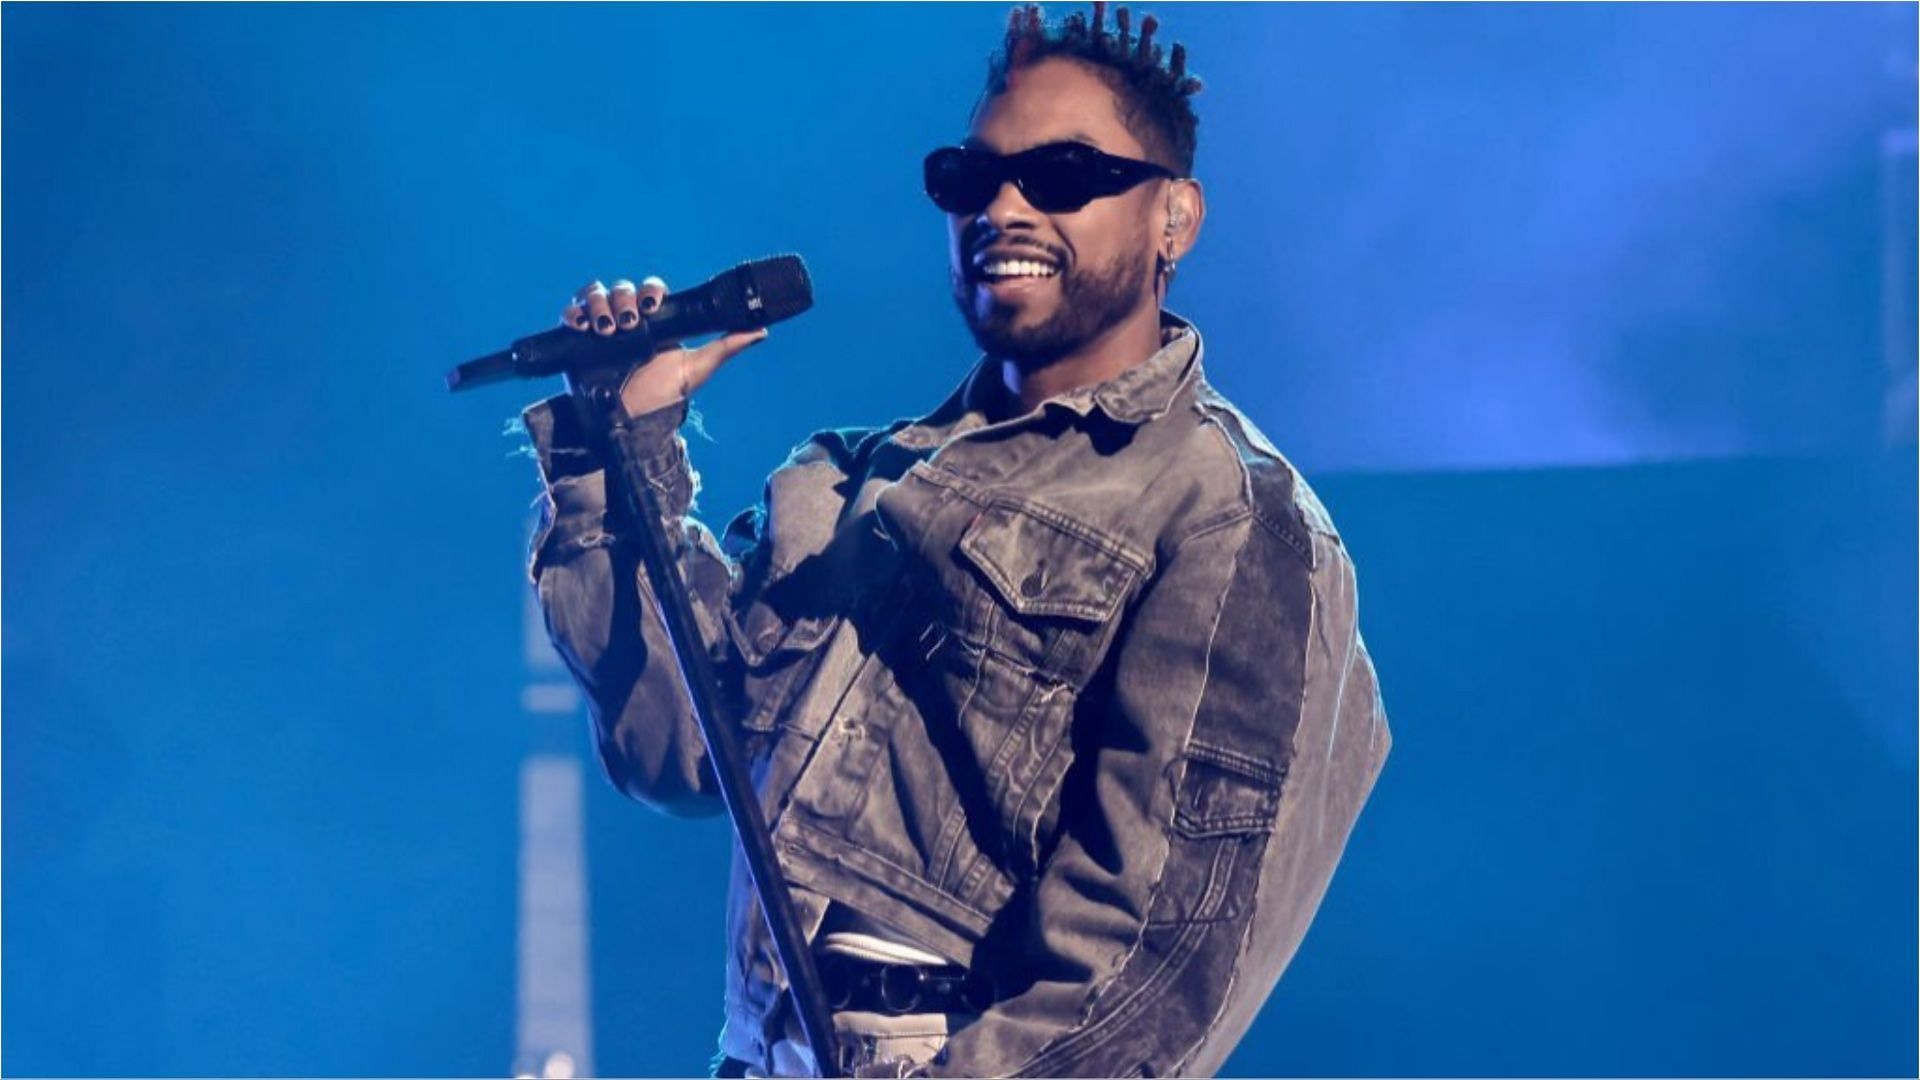 Miguel pierced his back with hooks as a part of his performance (Image via Kevin Winter/Getty Images)